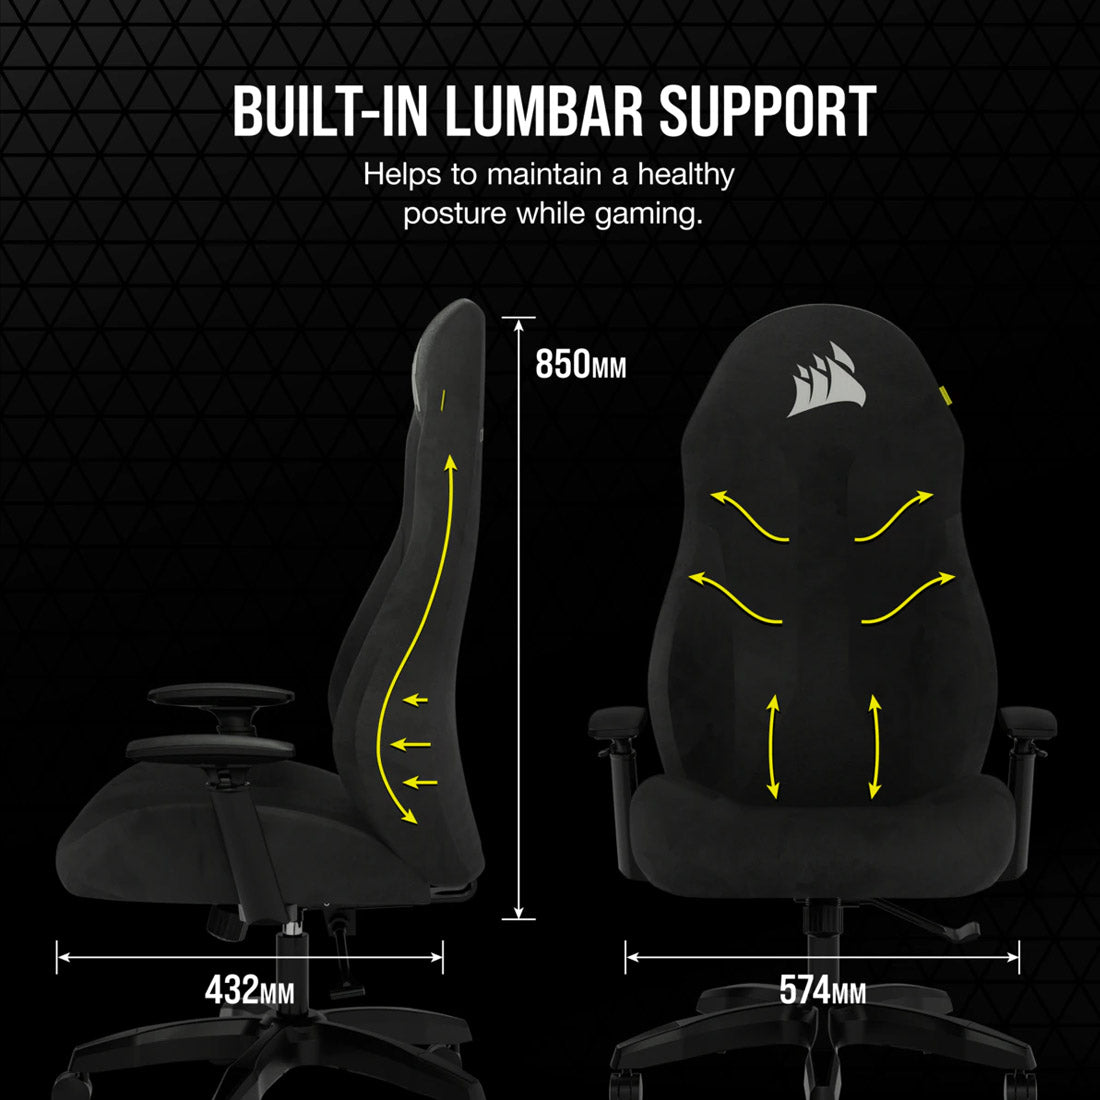 CORSAIR TC60 Fabric Black Gaming Chair with 105° Reclining Seat and 3D Arm Adjustment